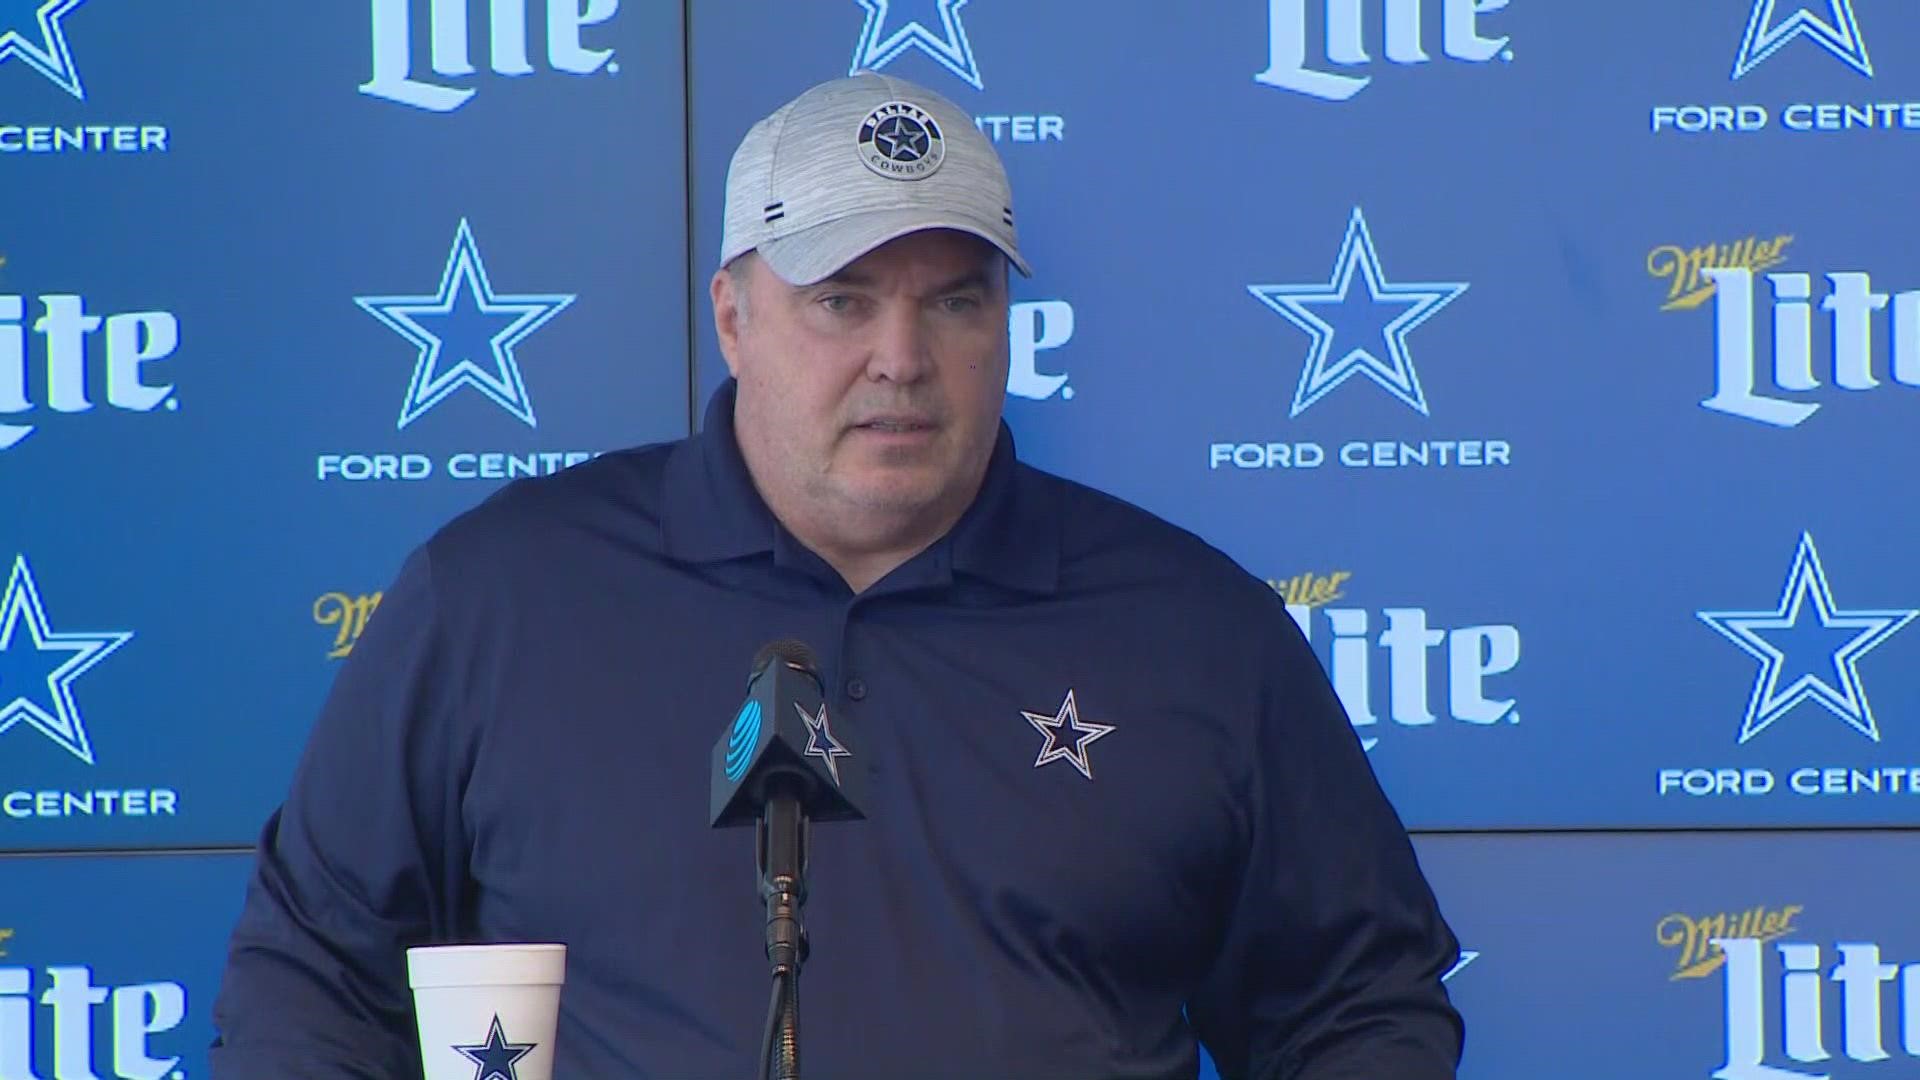 “We do have a number of guys who are sick who won’t be here today," Dallas Cowboys coach Mike McCarthy said during Tuesday's press conference.